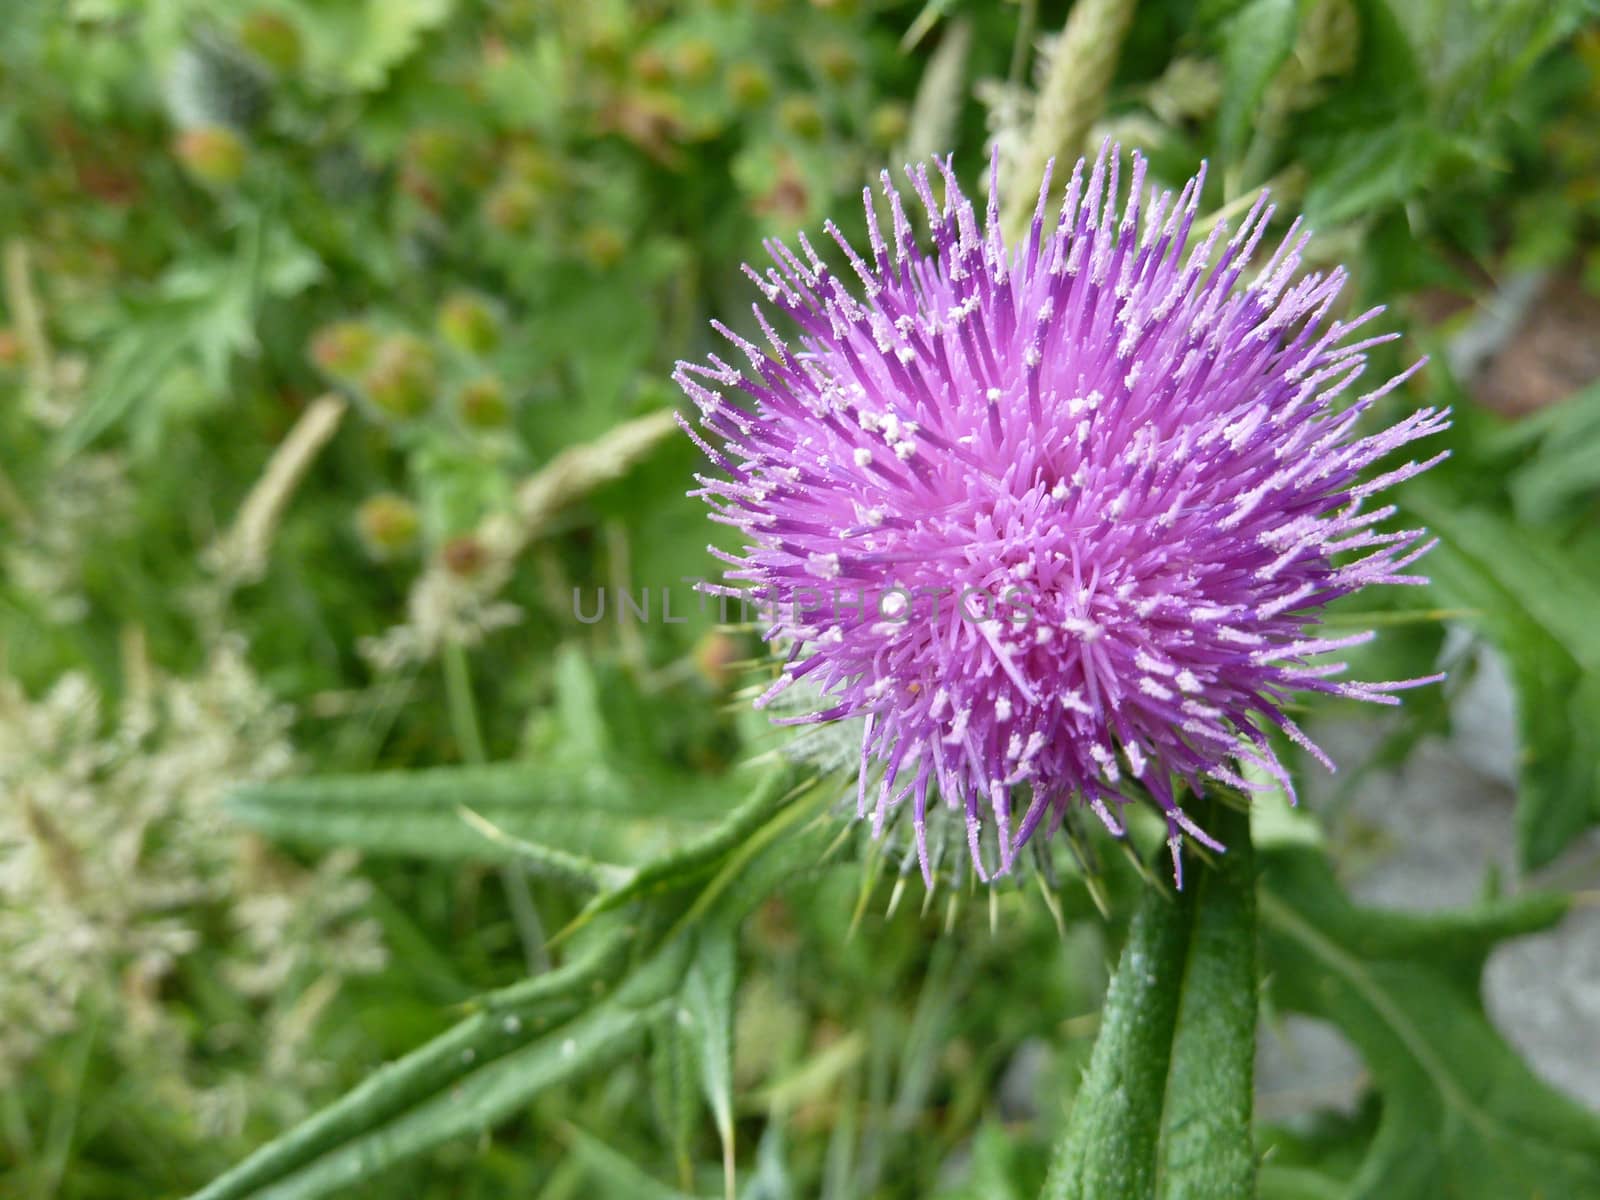 Thistle flower by gazmoi